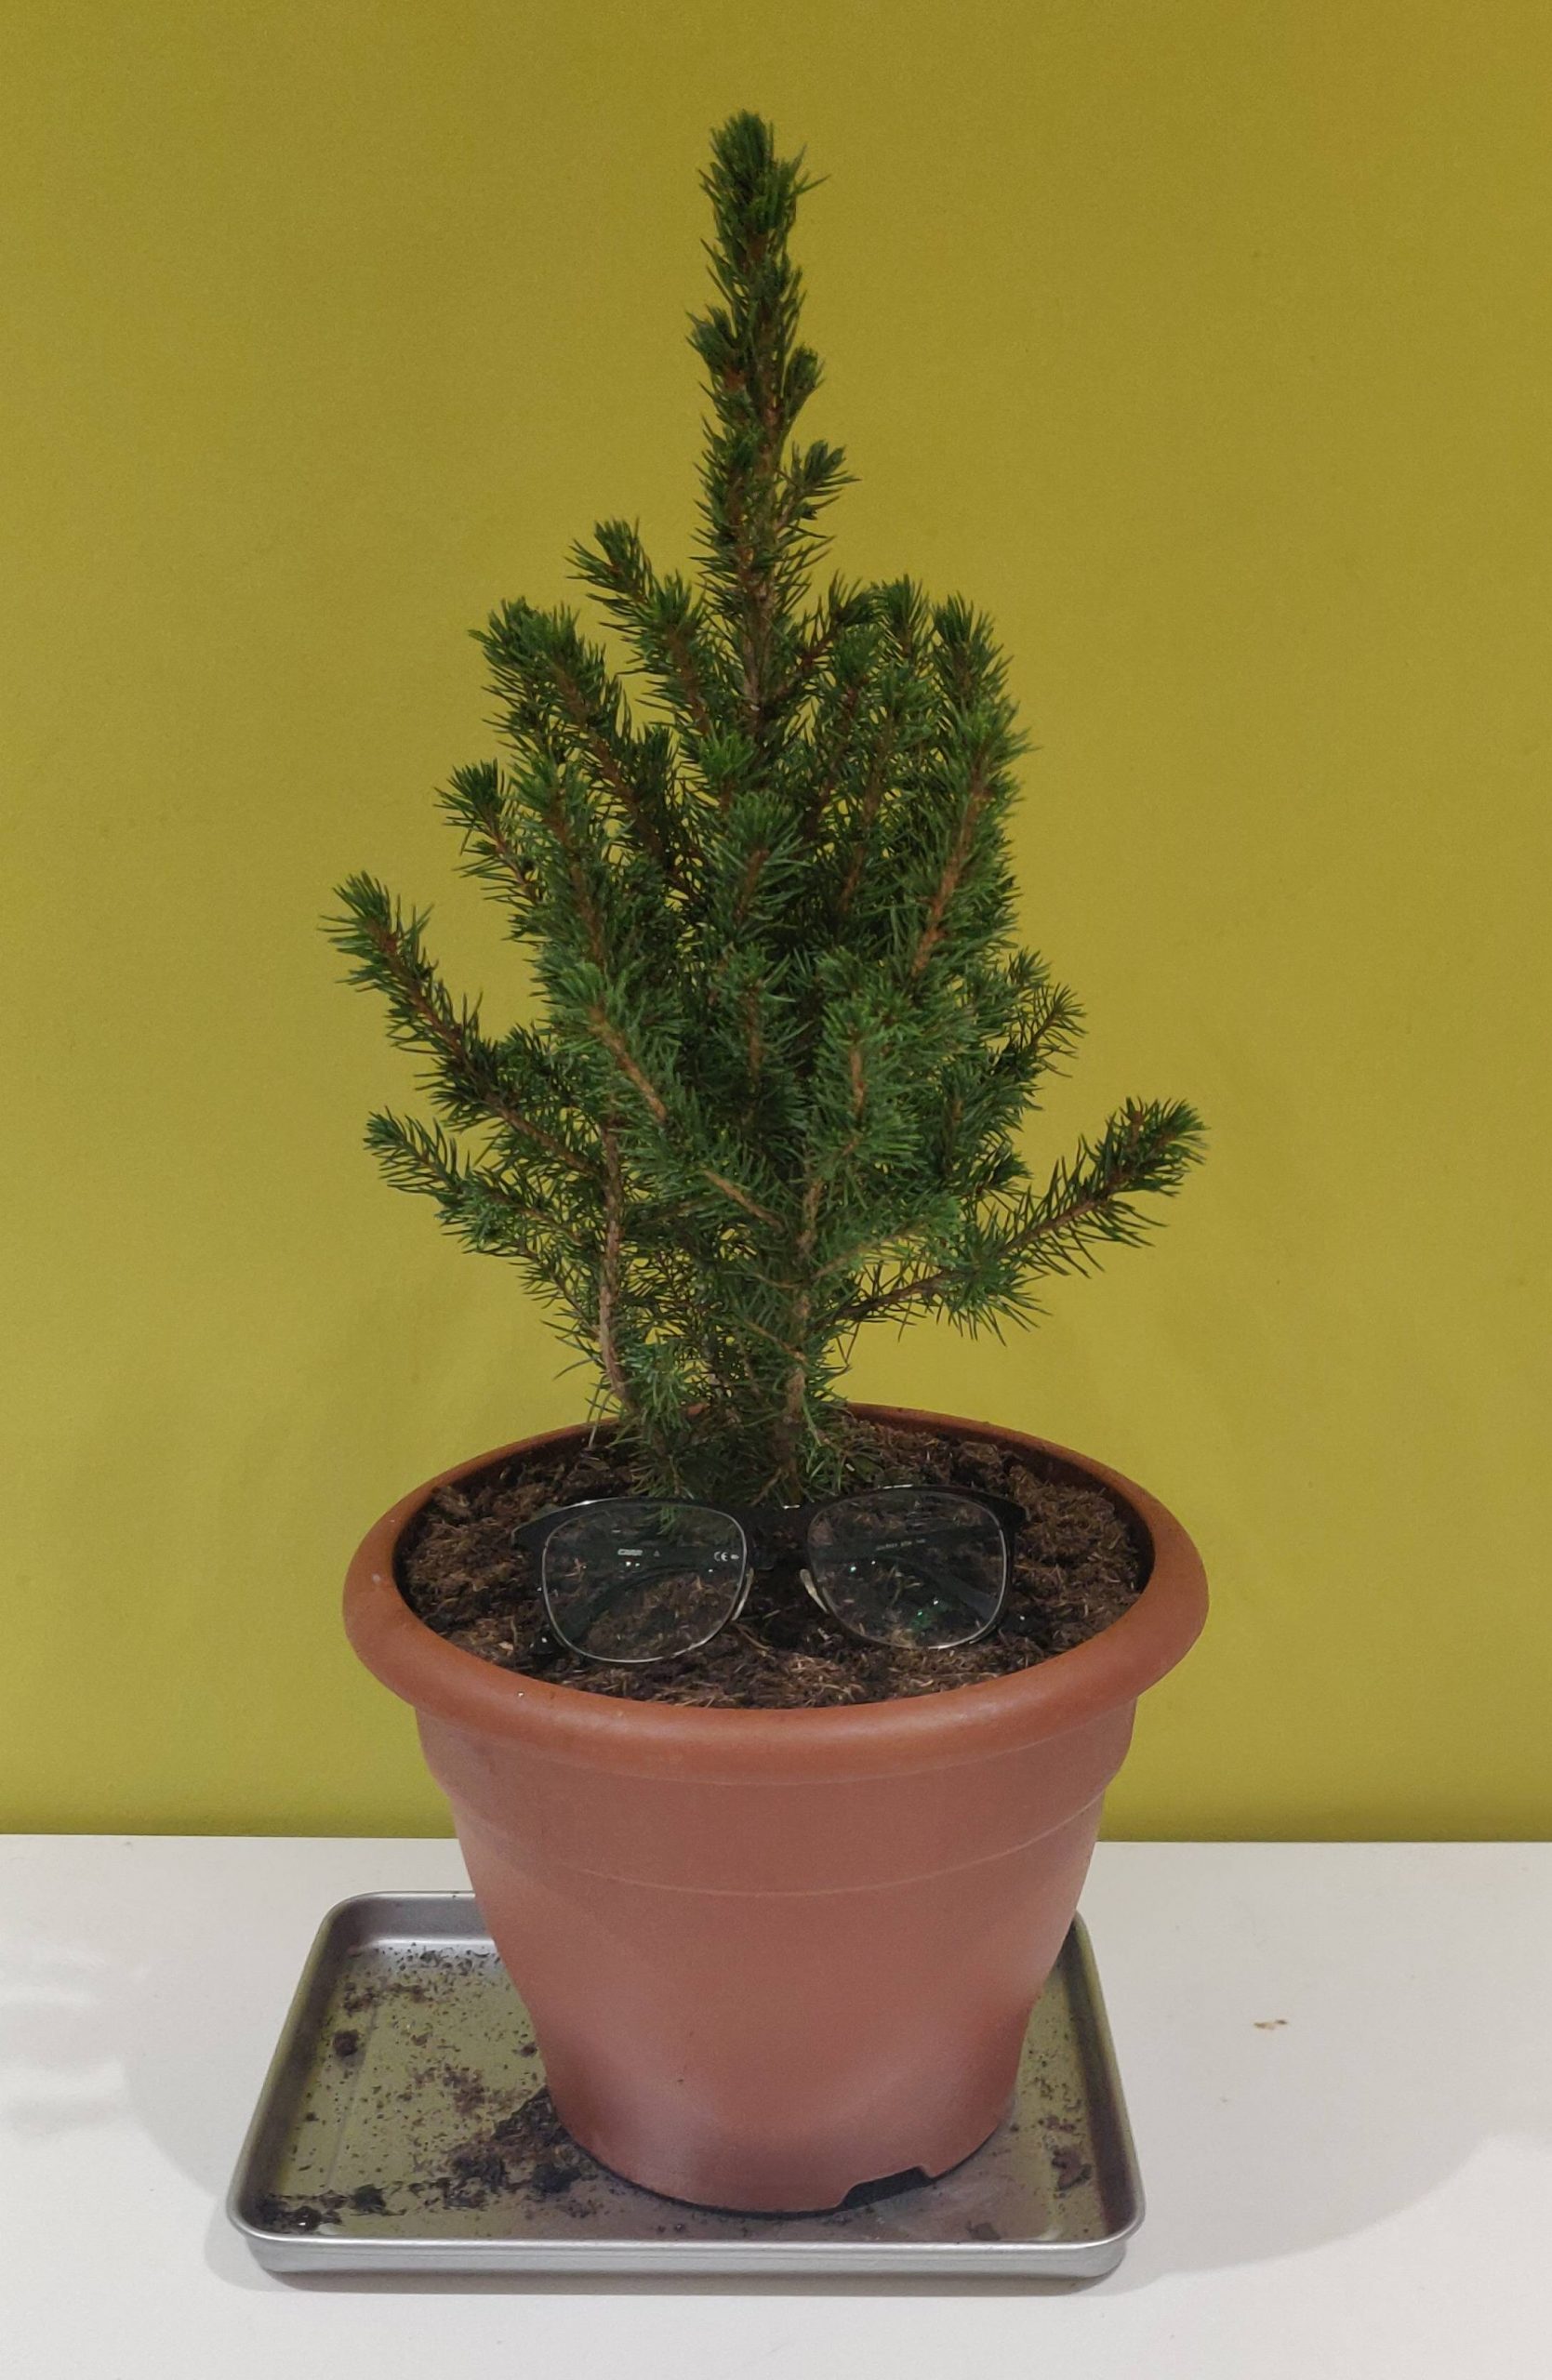 How to Care for a Pine Tree